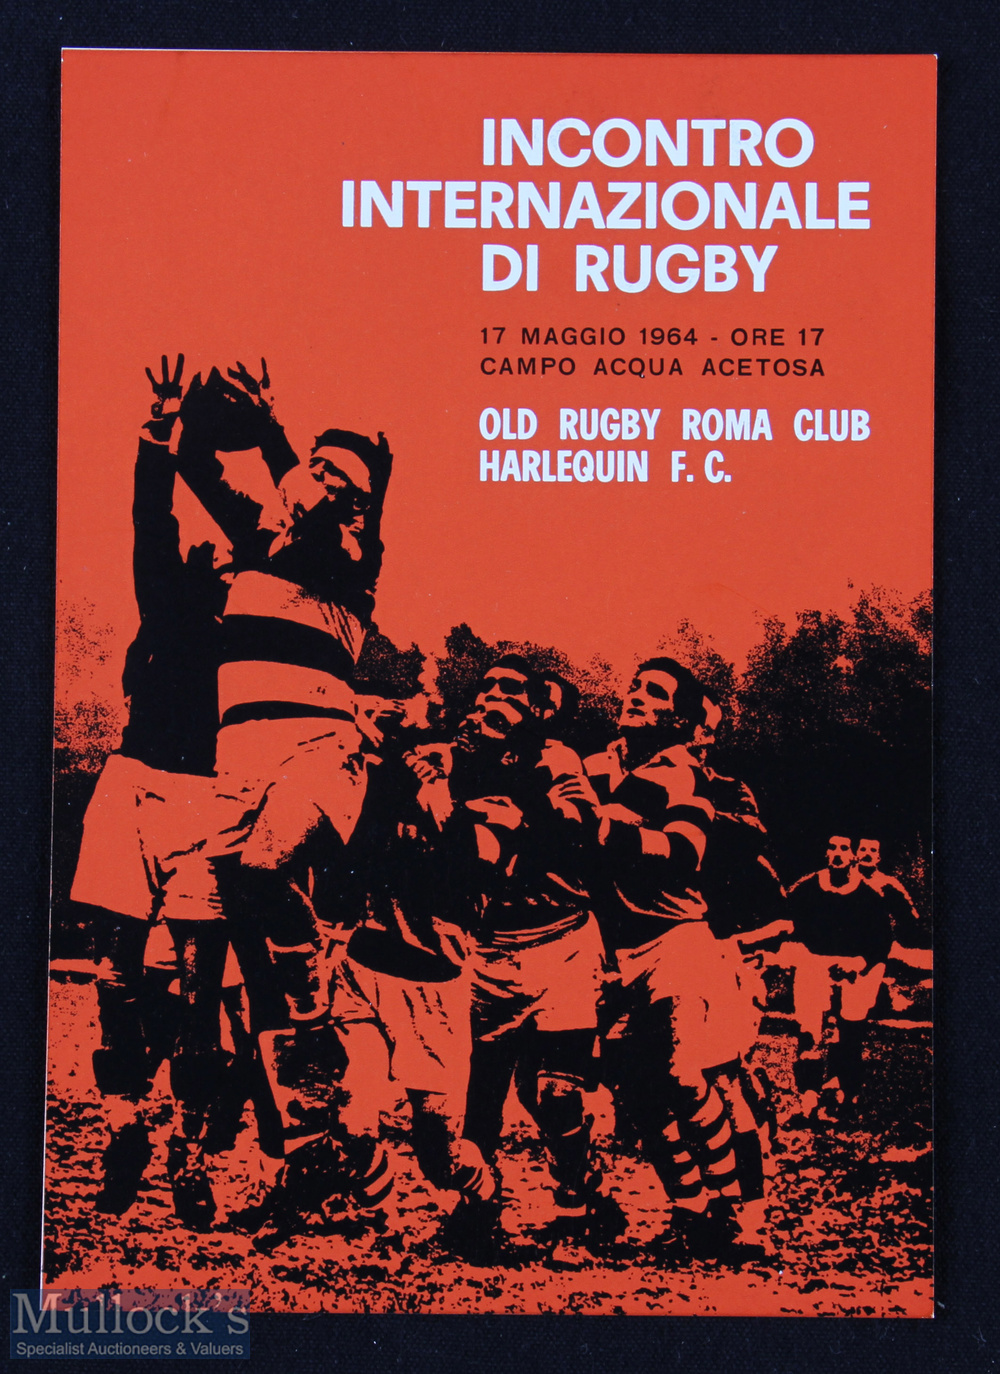 Rare 1964 Roma v Harlequins Rugby Postcard: Colourful advertising card for an unusual match at the